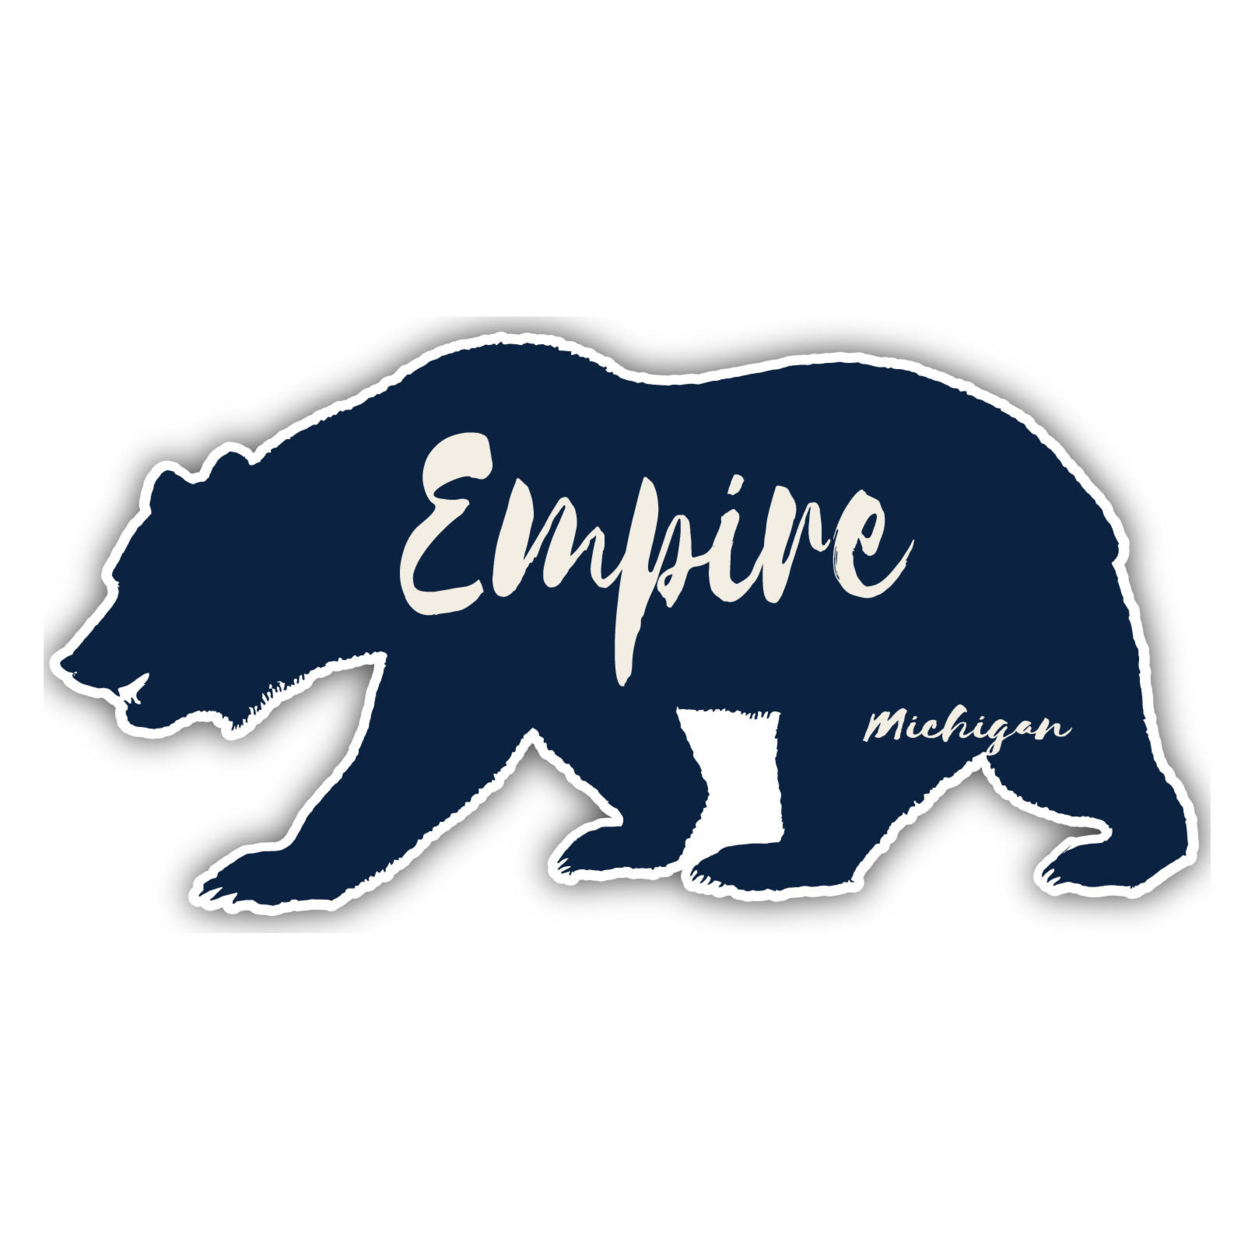 Empire Michigan Souvenir Decorative Stickers (Choose Theme And Size) - 4-Pack, 8-Inch, Bear